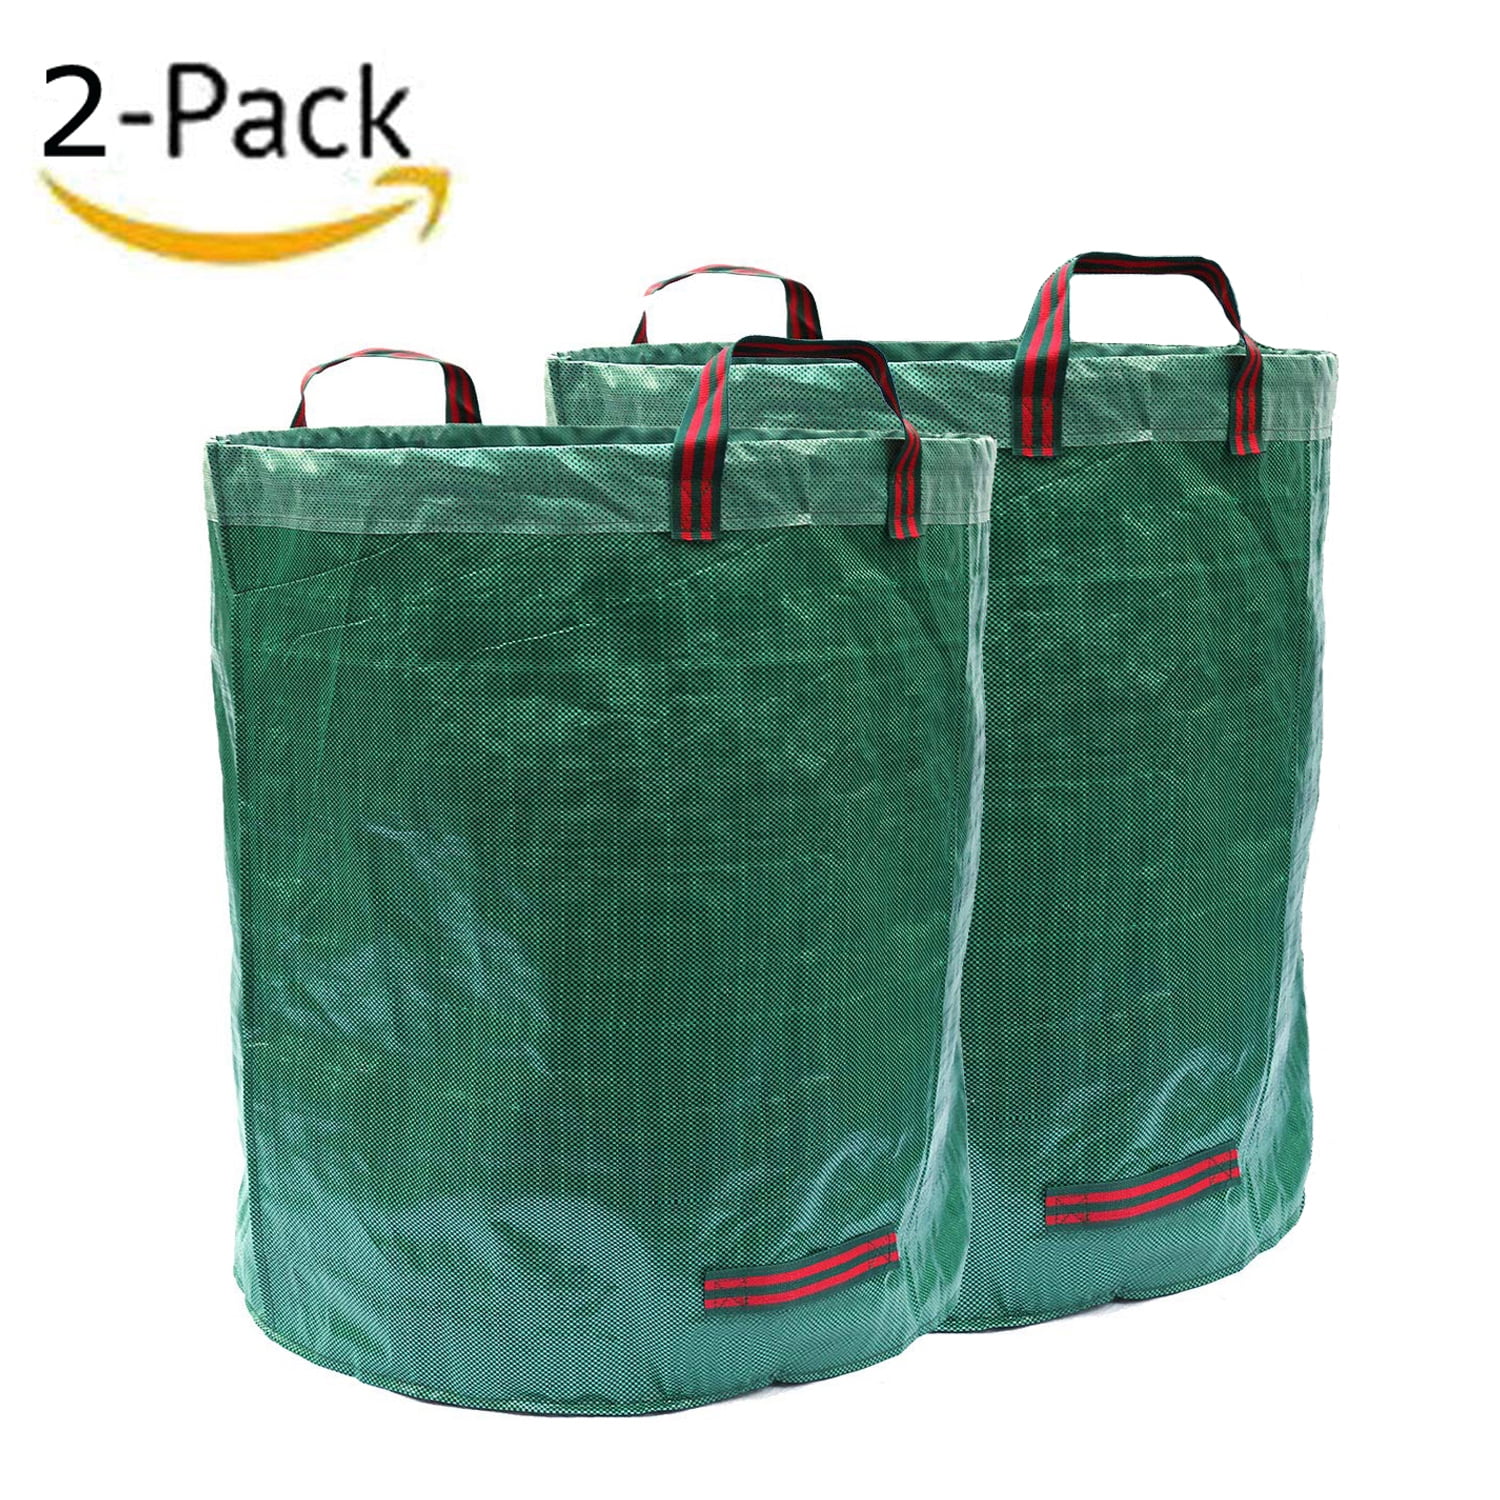 Heavy Duty LeafMate Collapsible Yard Bag Holder Fоur Paсk Reusable Leaf and Lawn Waste Bag